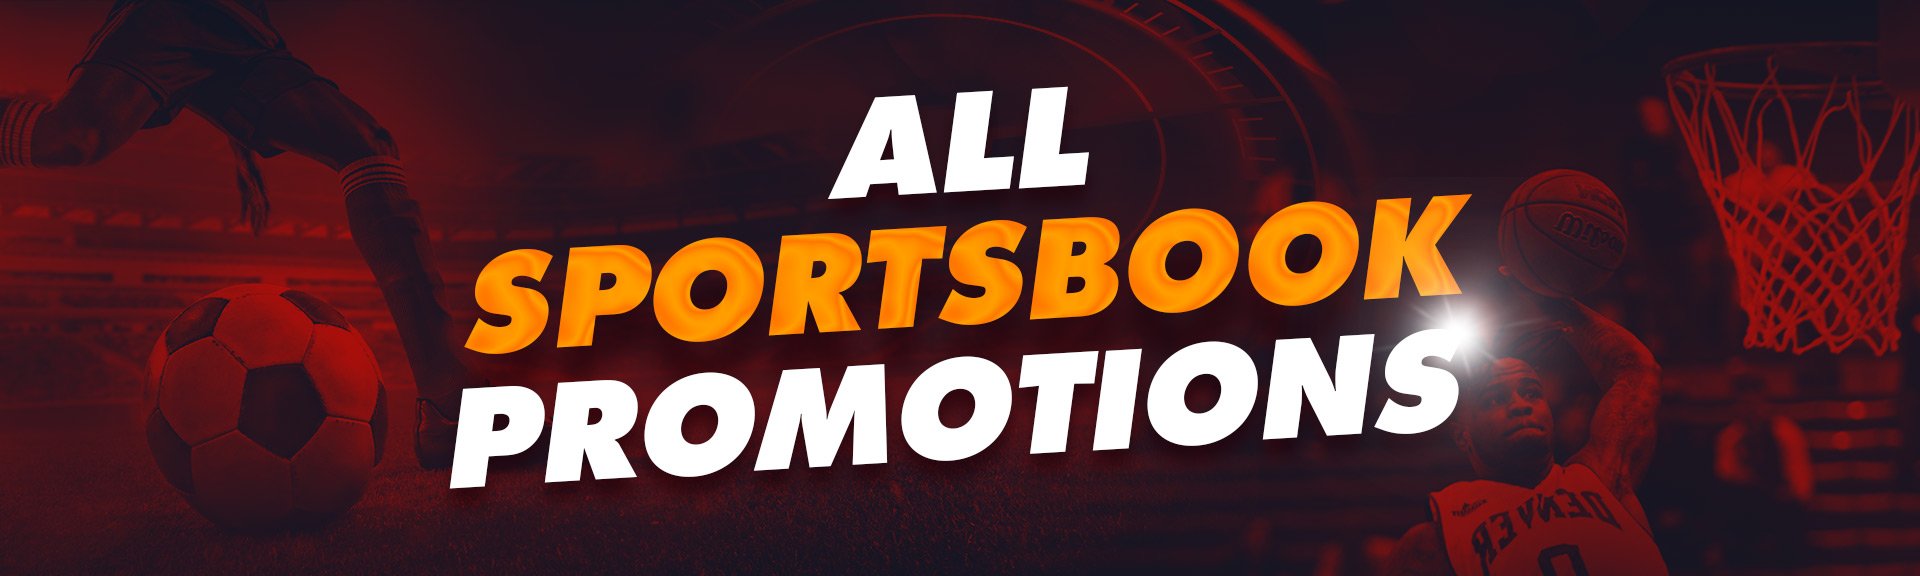 All sportsbook promotions